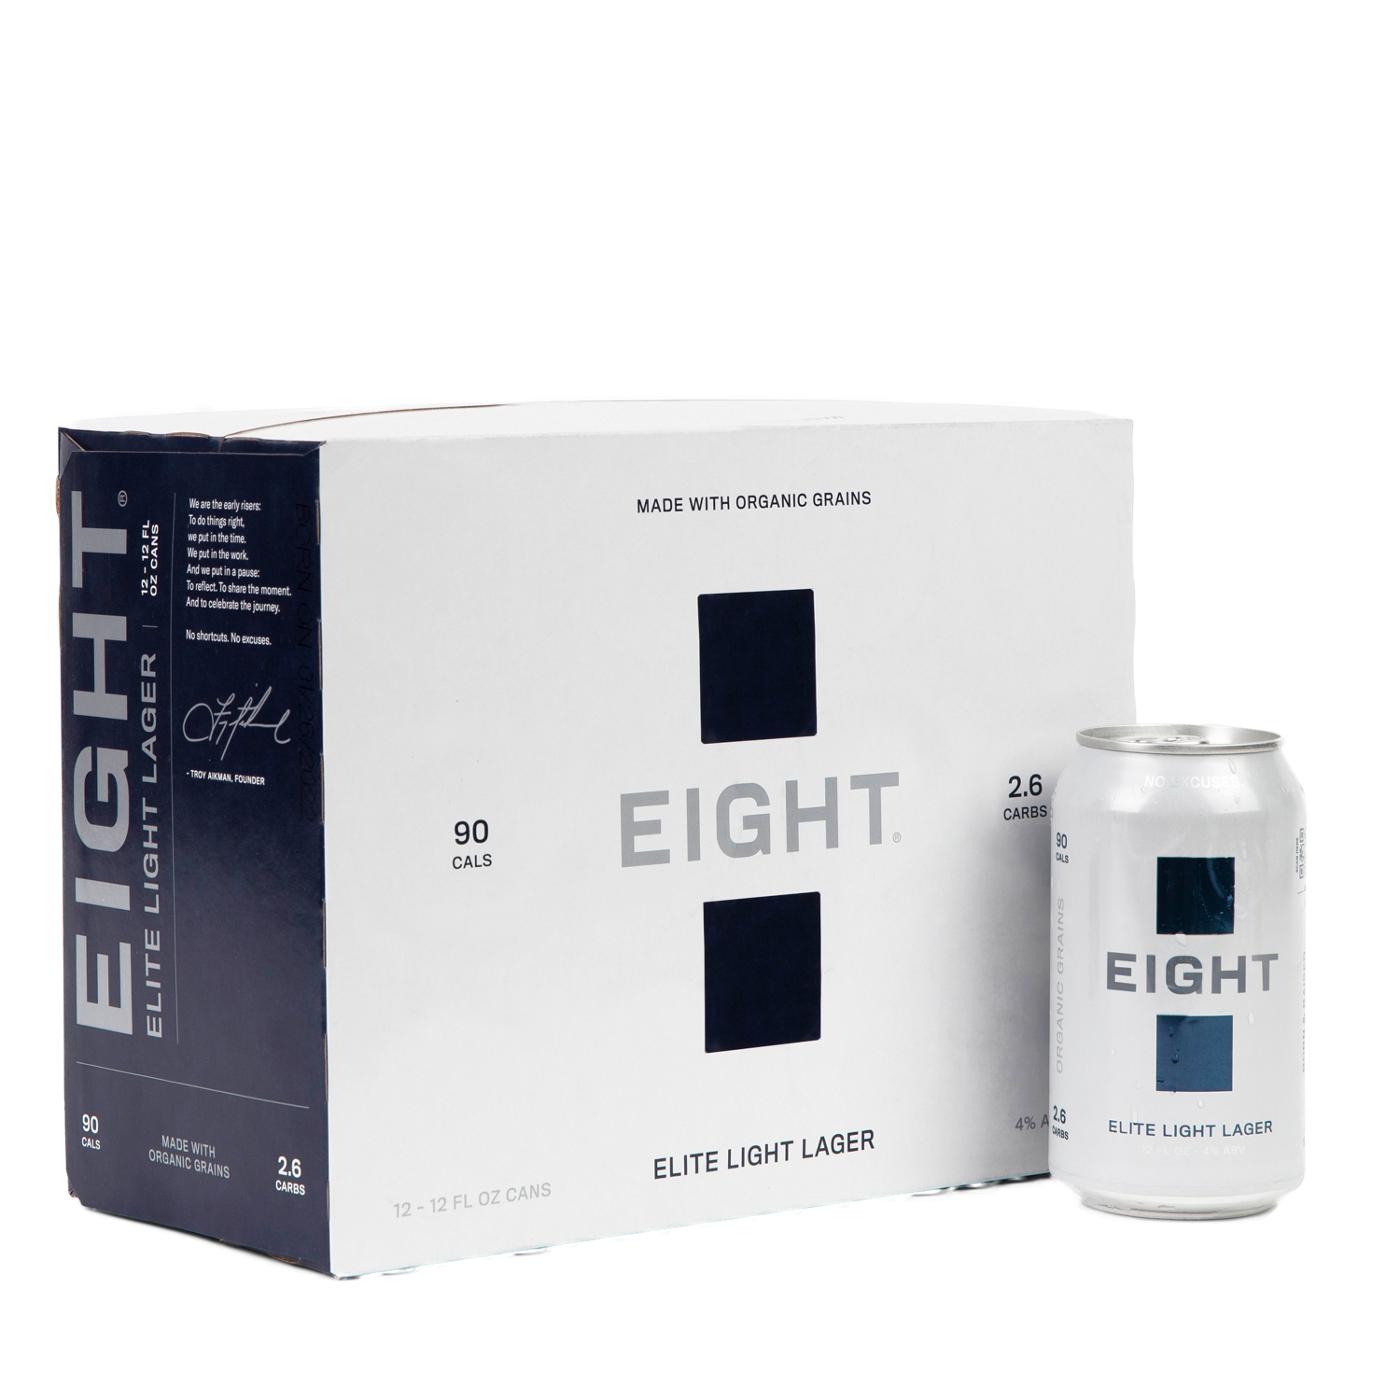 Eight Elite Light Lager 12 oz Cans; image 4 of 4